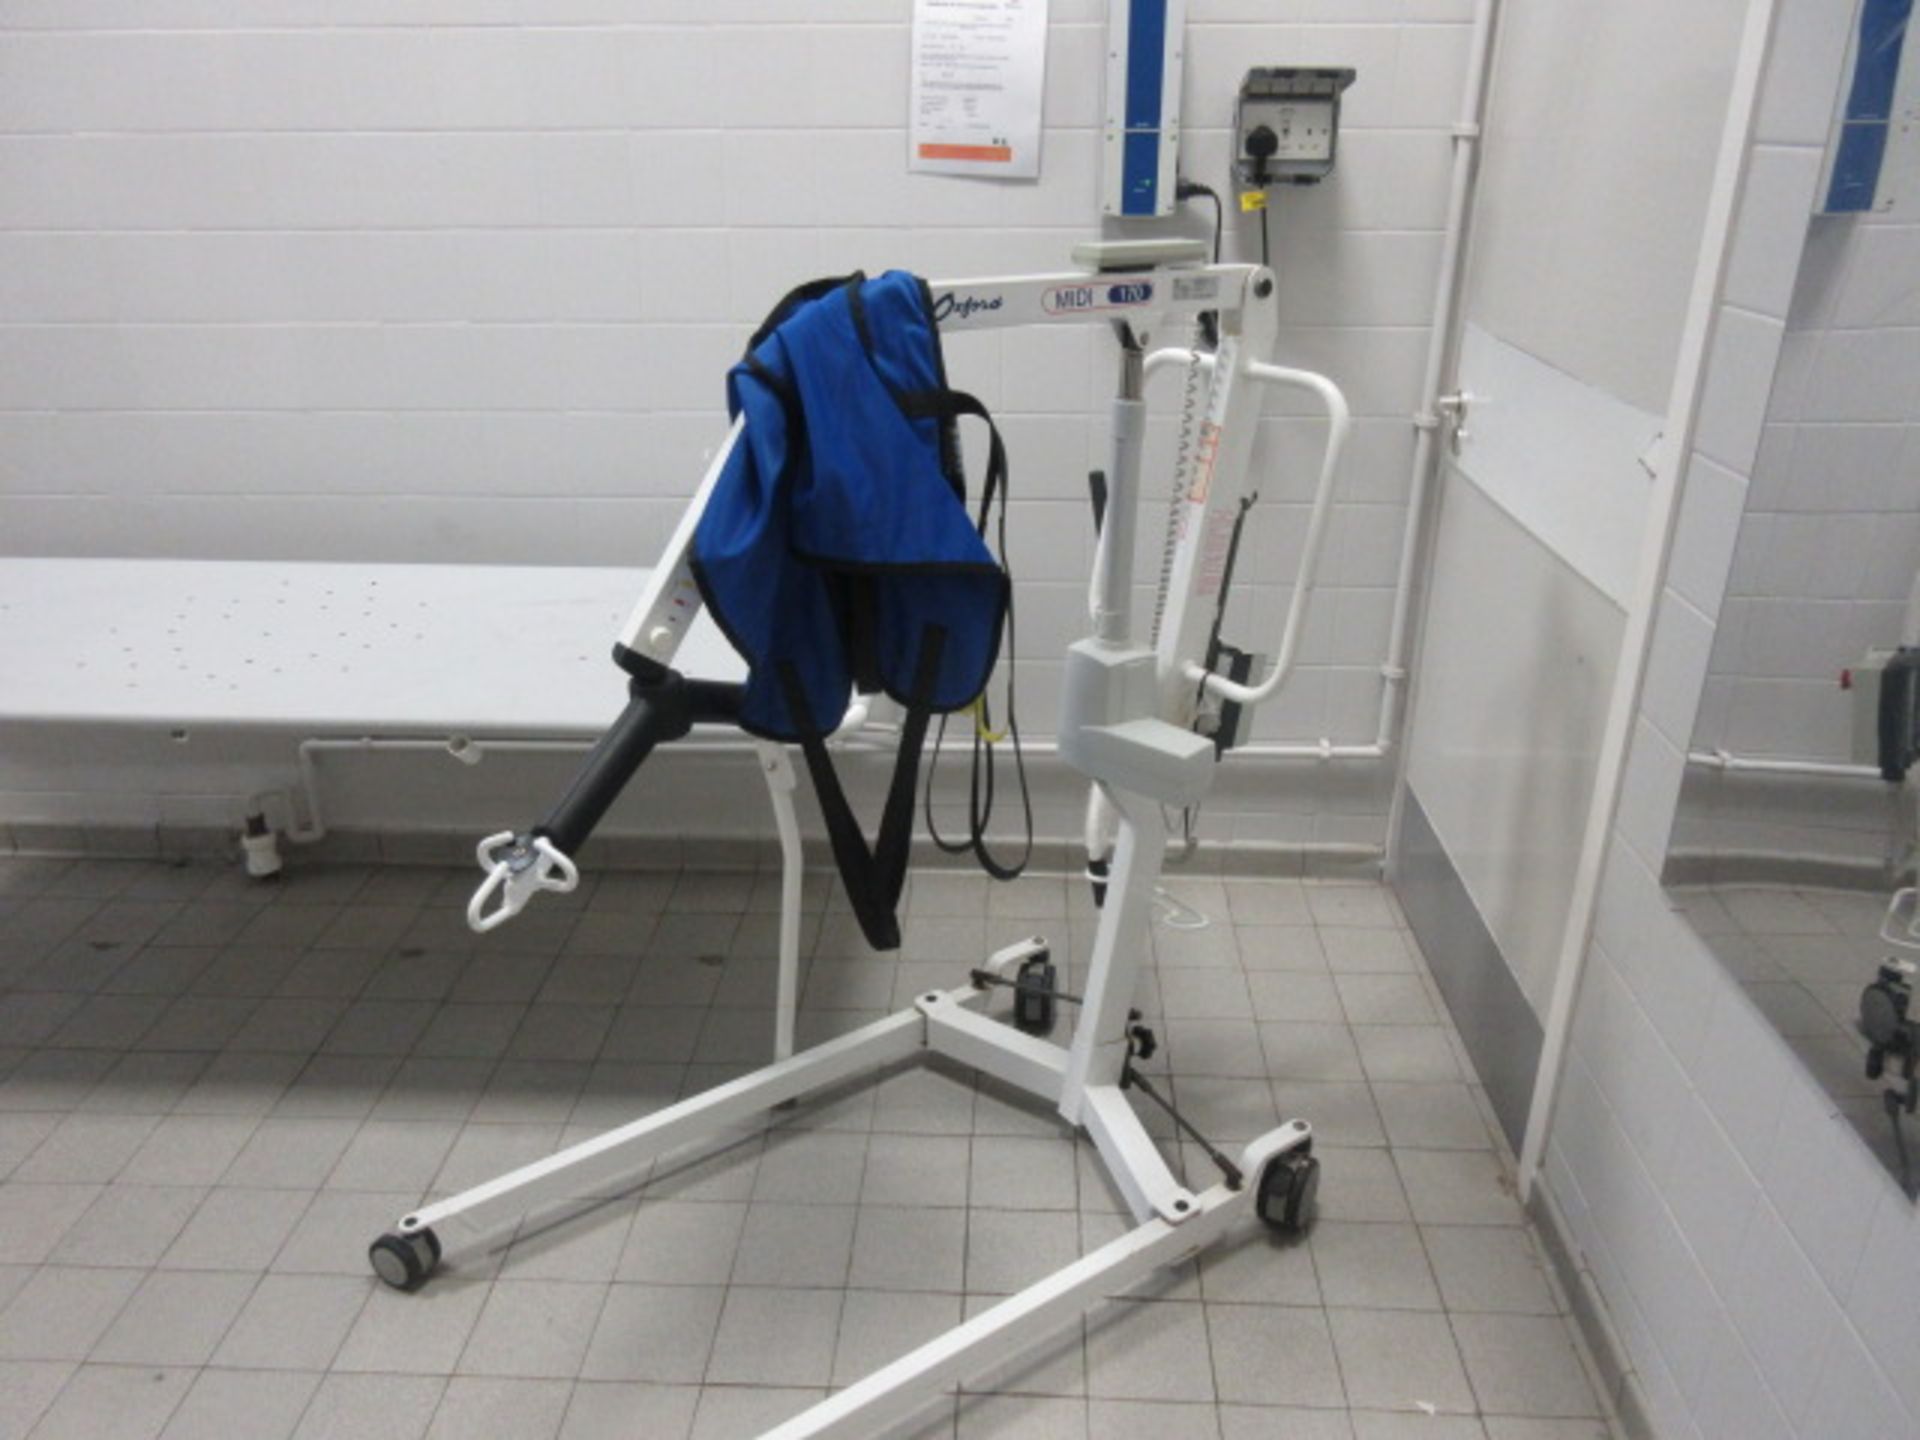 Sunrise Medical Midi 170 Patient Lifting Apparatus. Battery powered lifter with charger point (